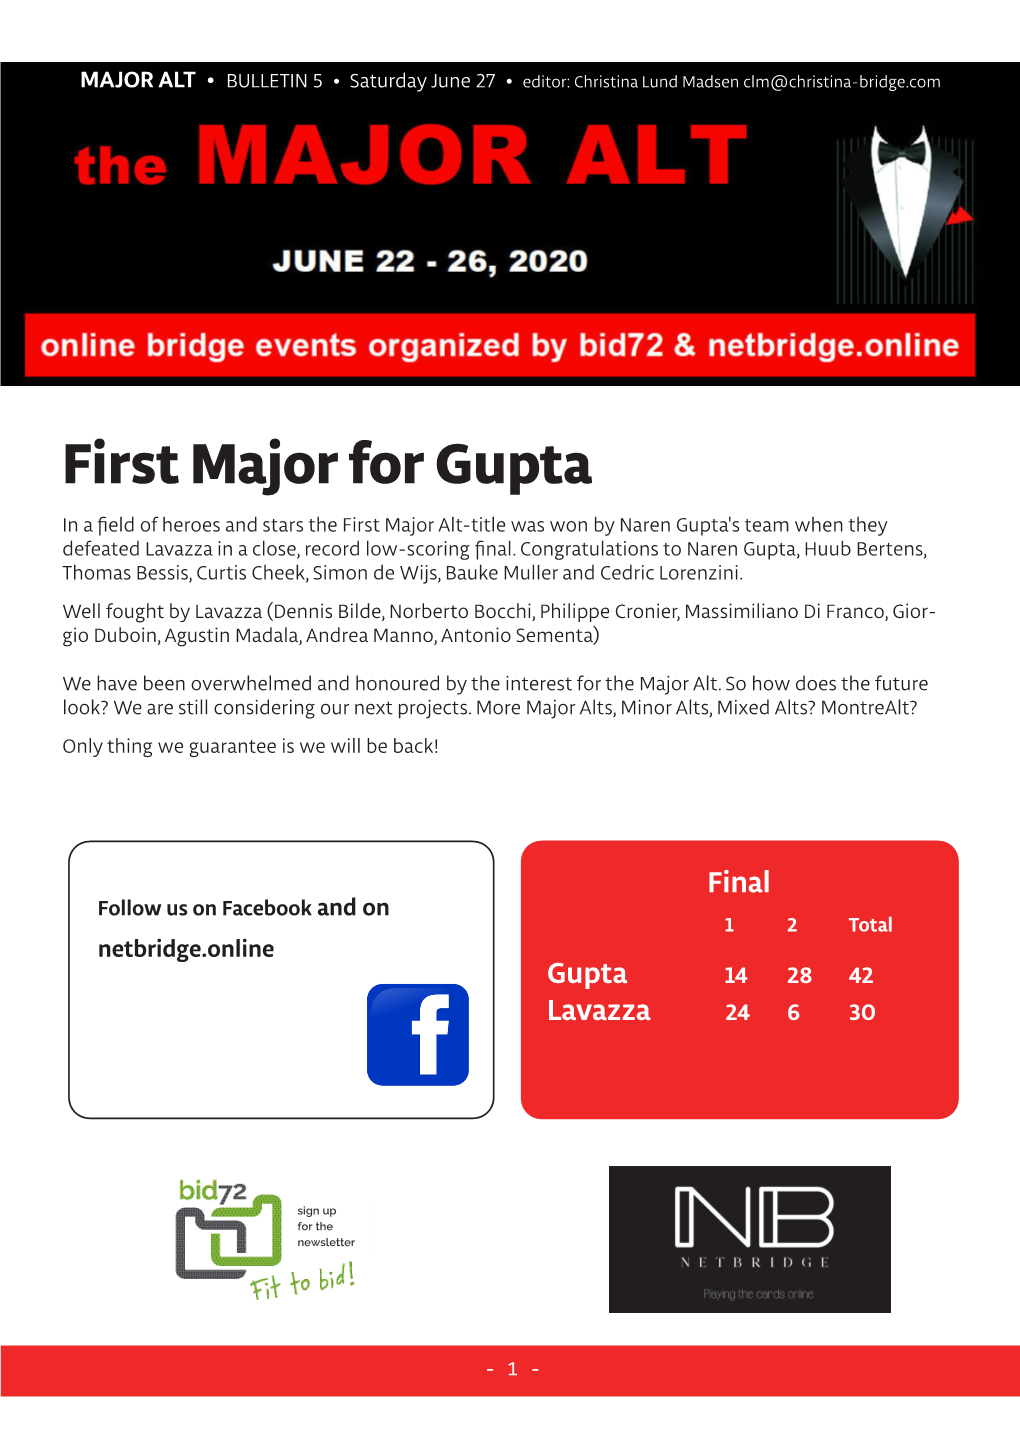 First Major for Gupta